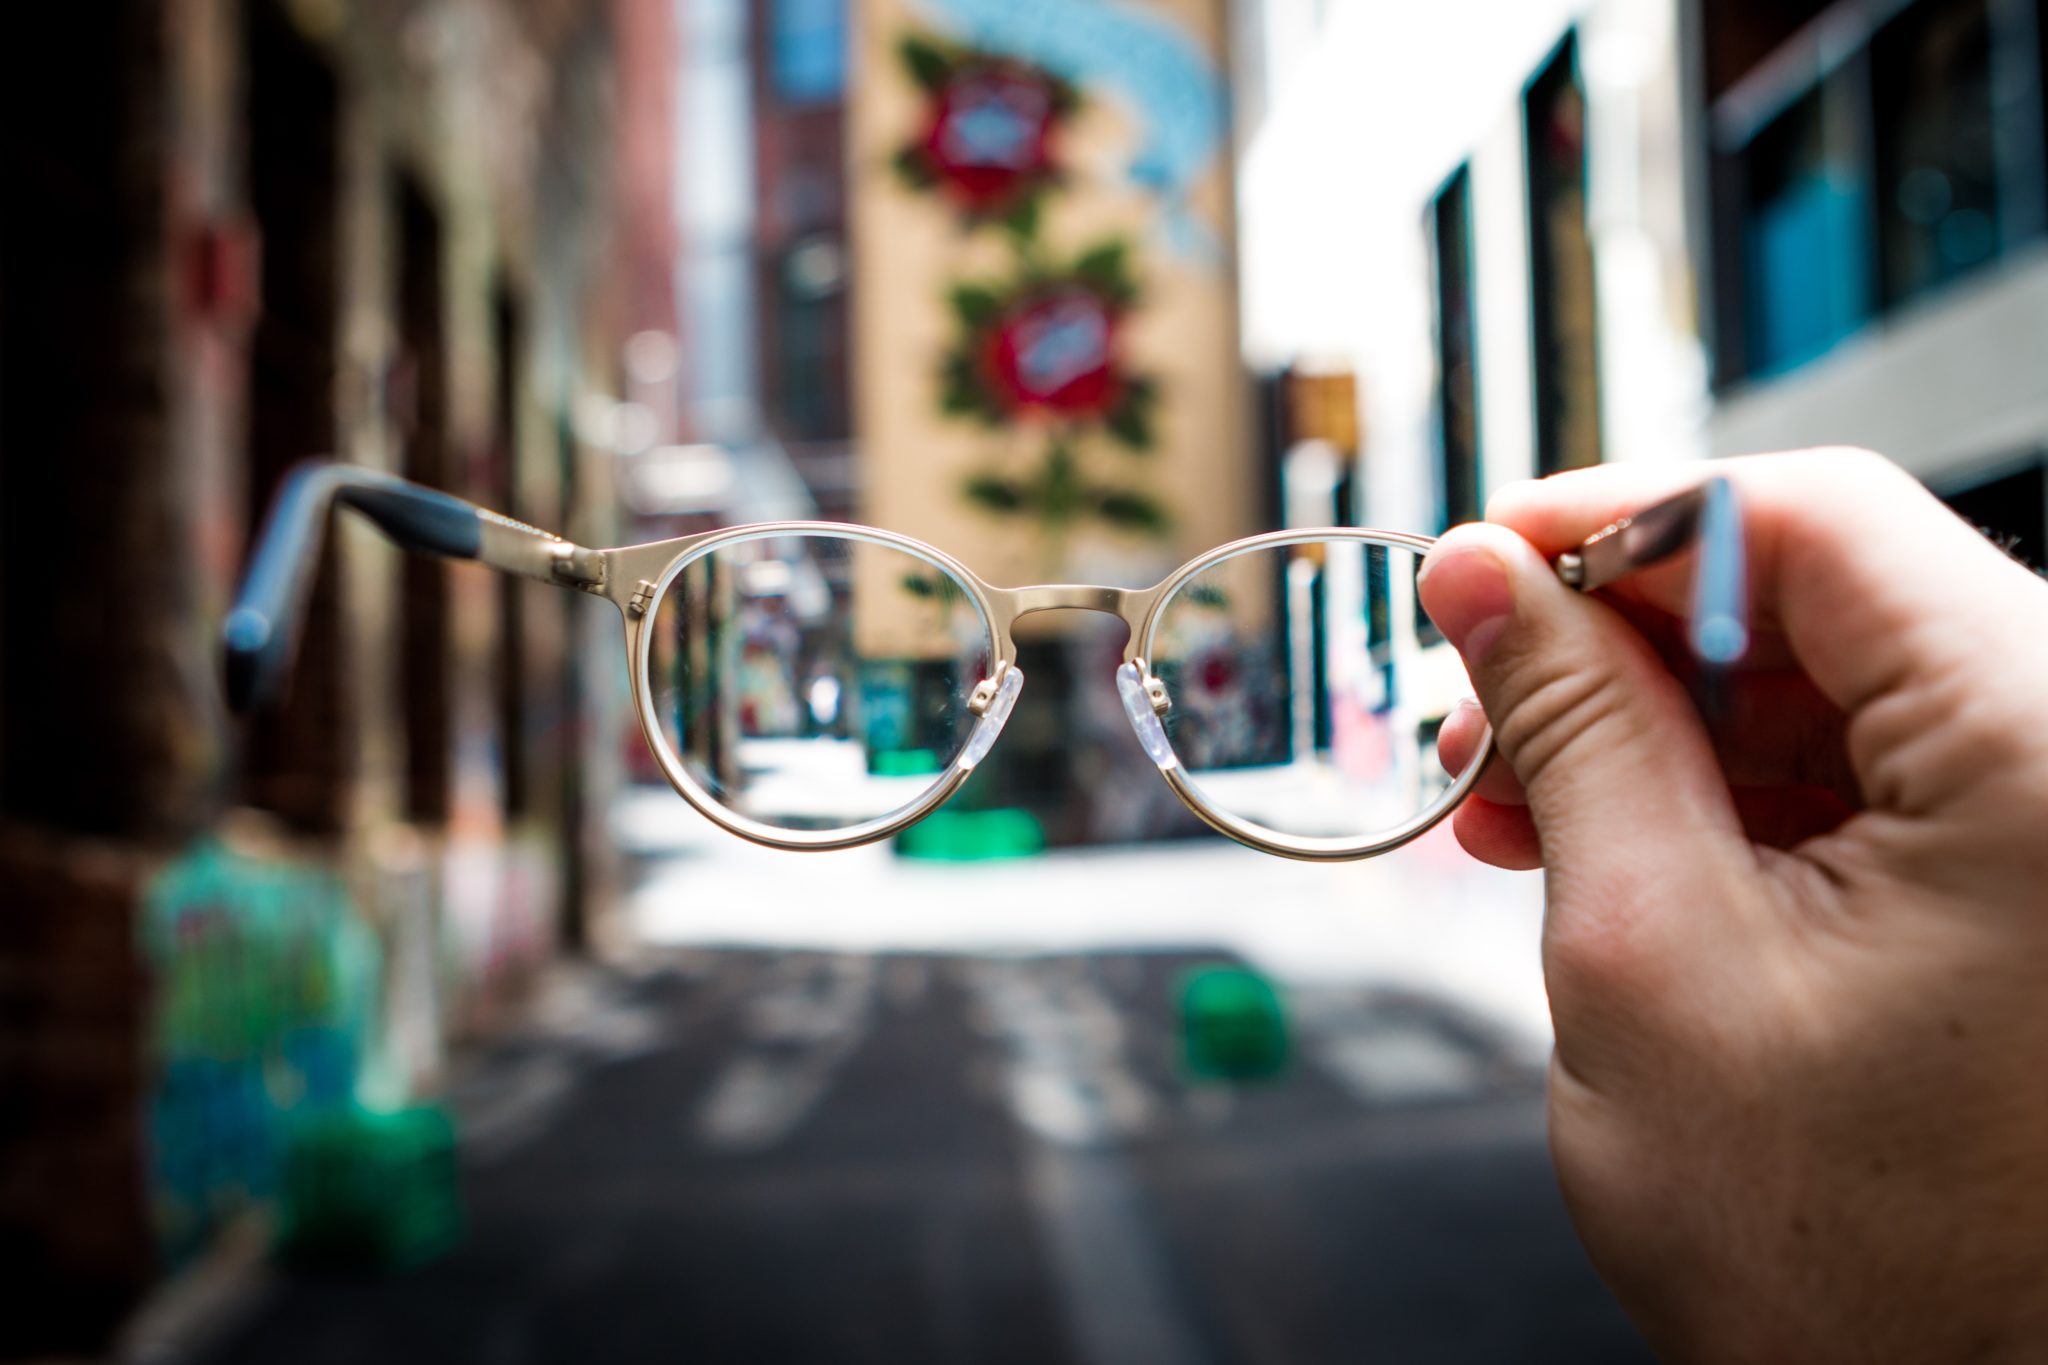 A hand holding eyeglasses with a city street in the background.